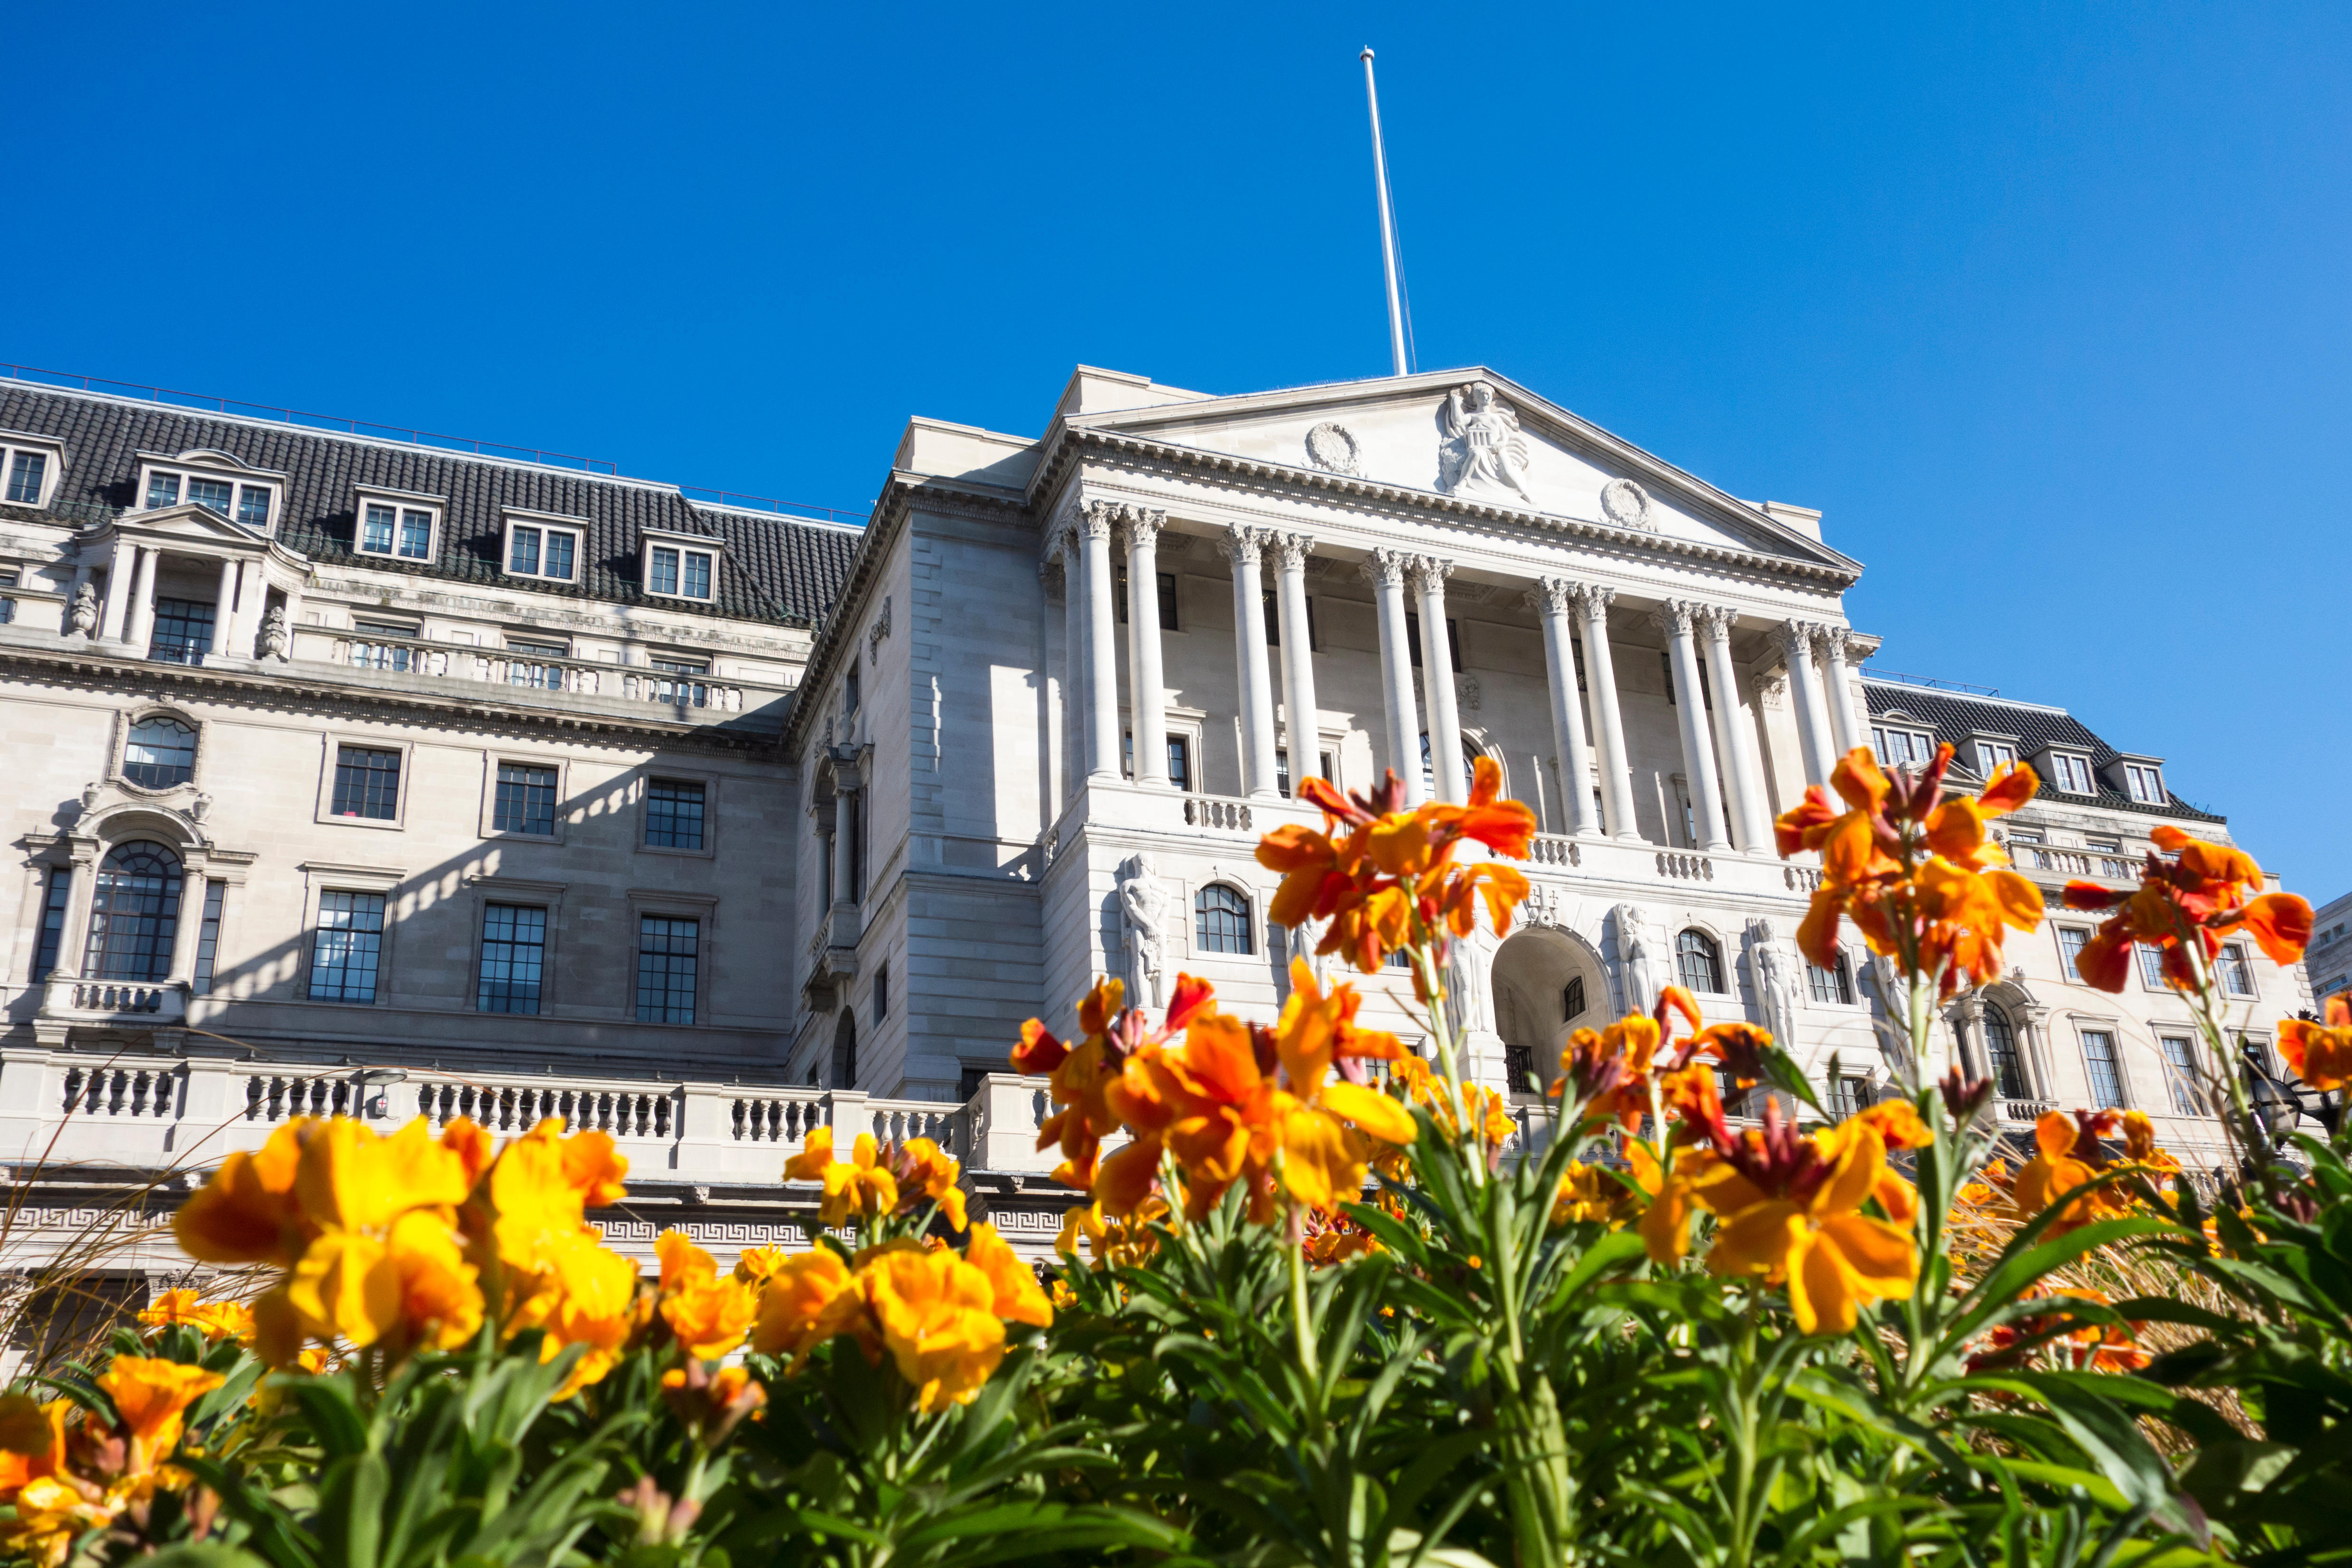 The Bank of England has written to commercial lenders outlining its concerns